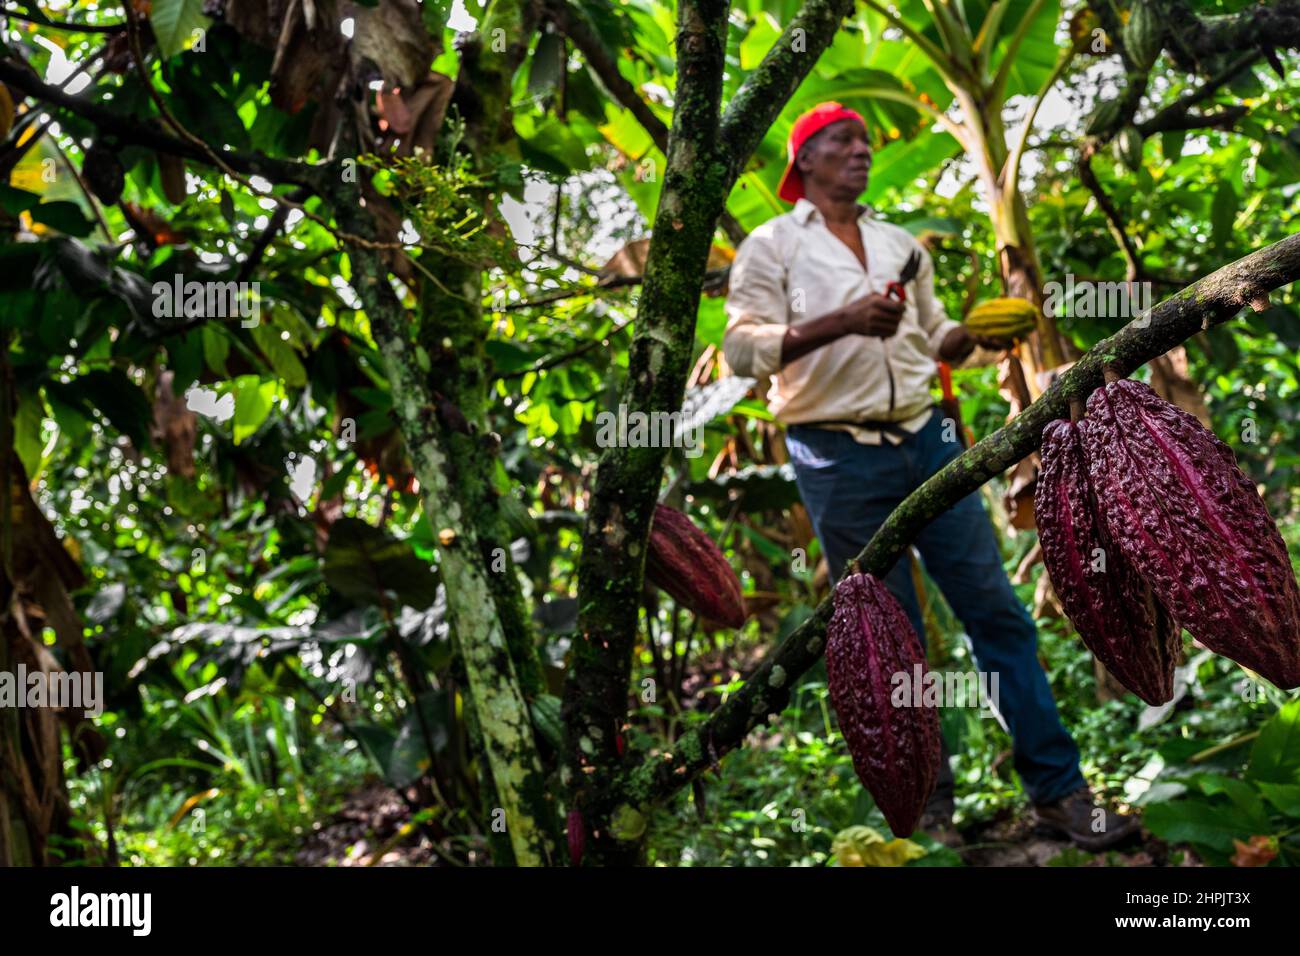 Rigoberto Balanta, an Afro-Colombian farmer, cuts cacao pods from a tree during a harvest on a traditional cacao farm in Cuernavaca, Cauca, Colombia. Stock Photo